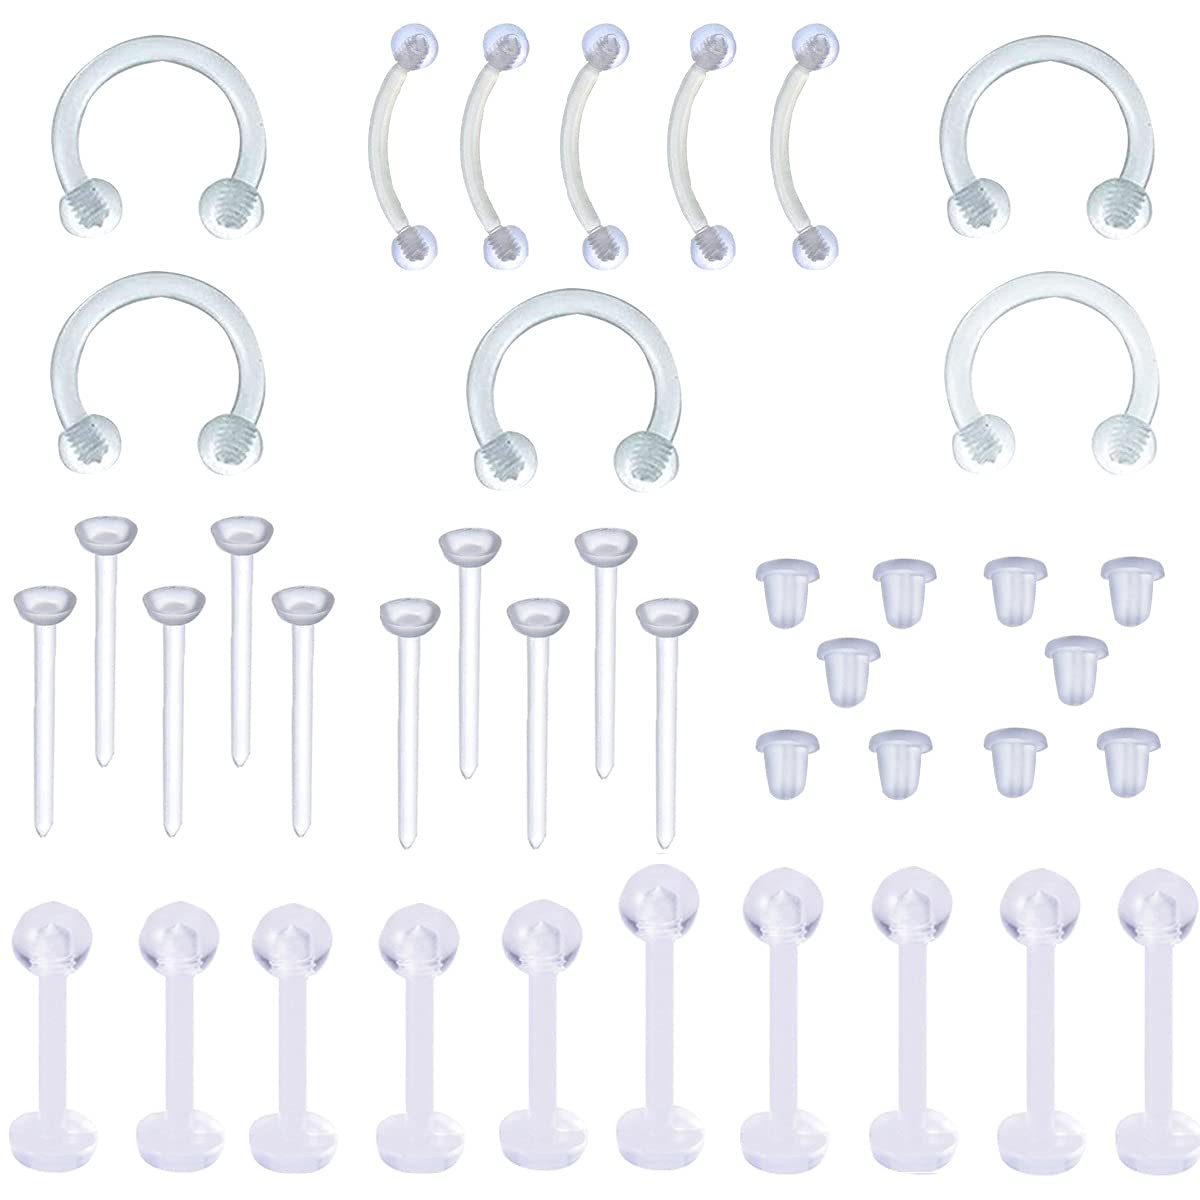 Rlbytia 32-50pcs Clear Earrings Studs Piercing Retainer Acrylic Bioflex Flexible Septum Lip Labret Tragus Helix Cartilage Nose Studs Rings Hoop 16G 20G 14G for School Invisible Piercing